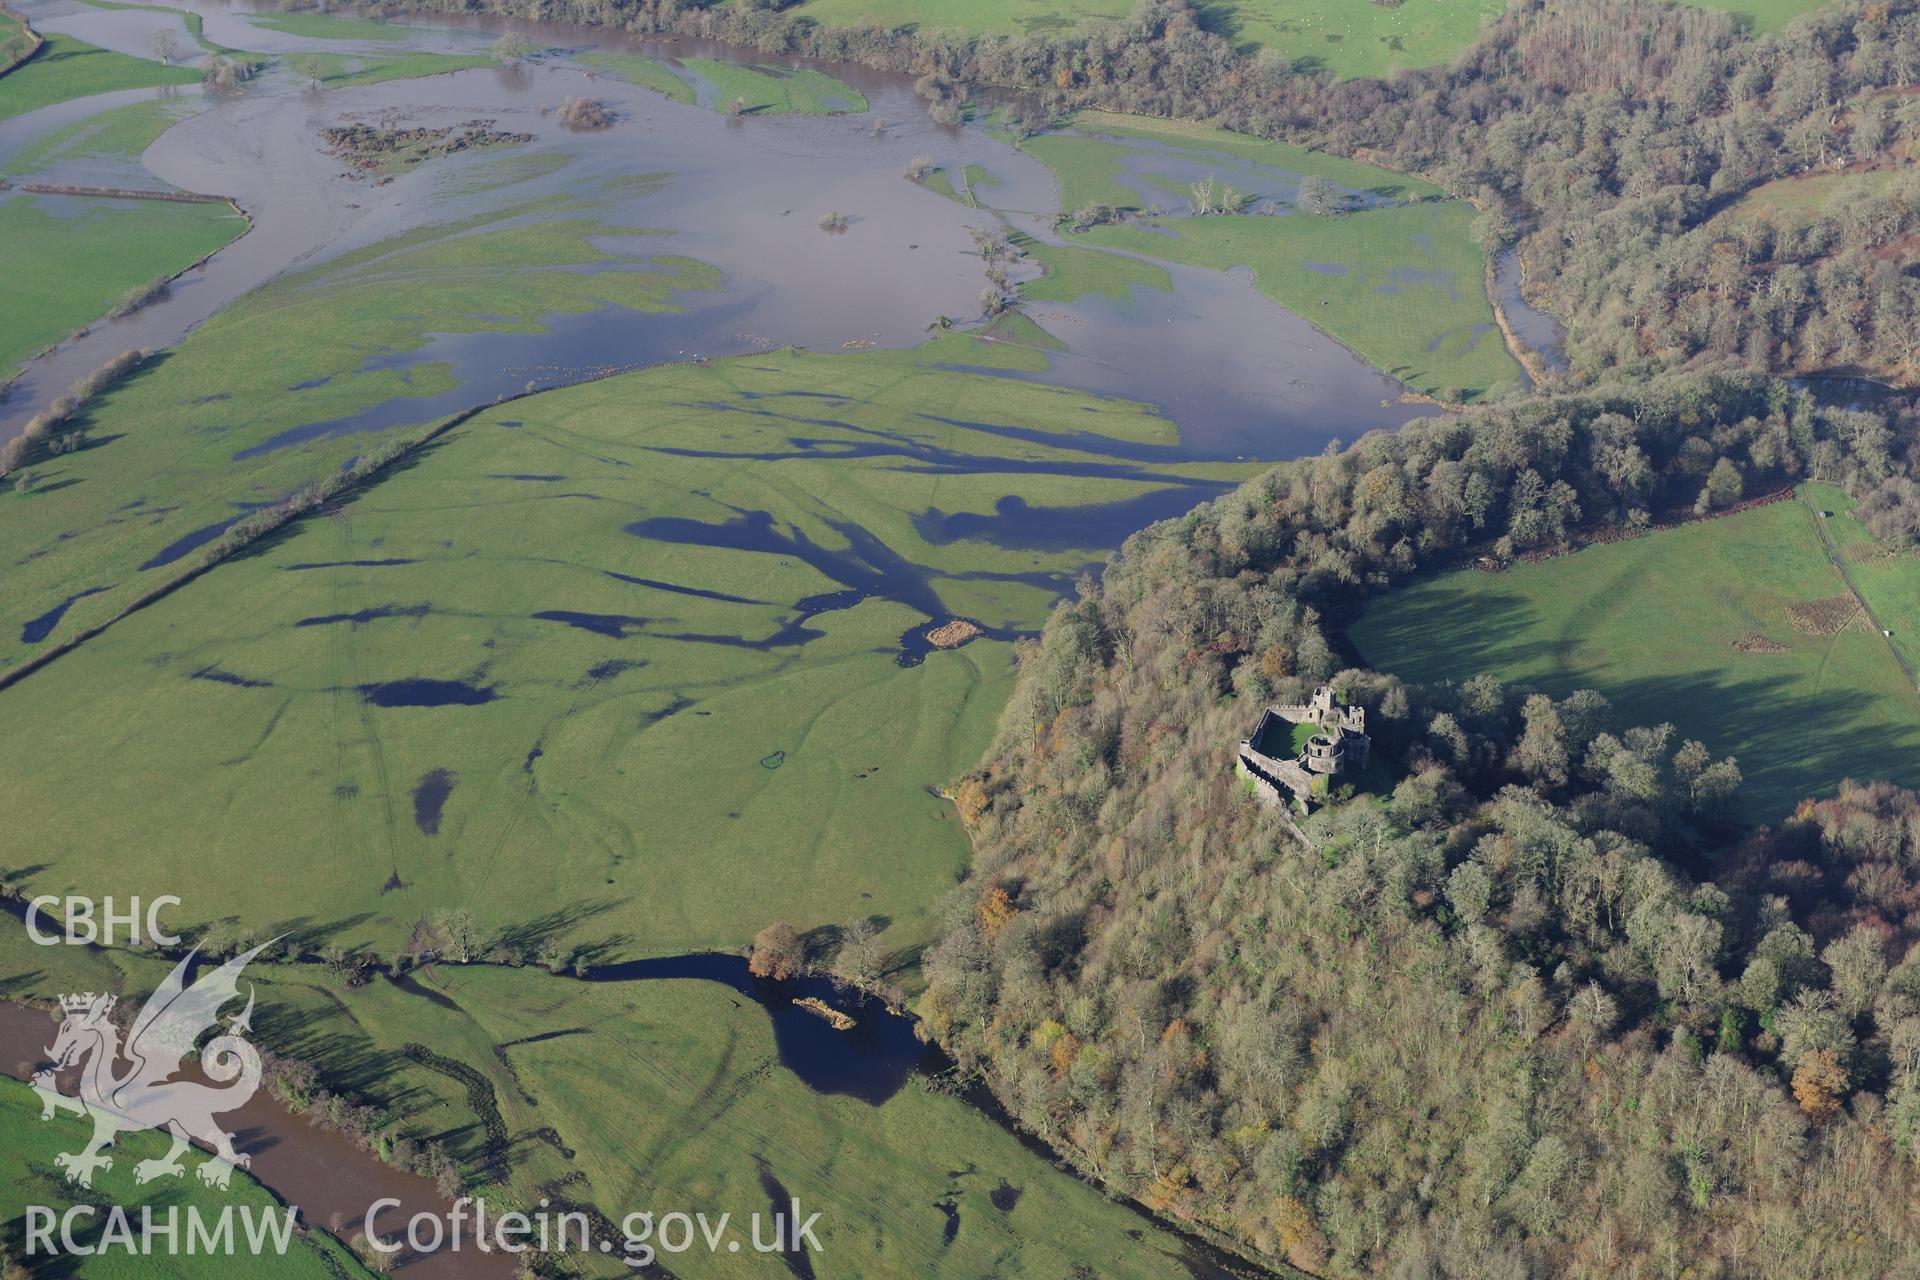 RCAHMW colour oblique photograph of Dinefwr Castle, landscape view from south-east with floods. Taken by Toby Driver on 23/11/2012.